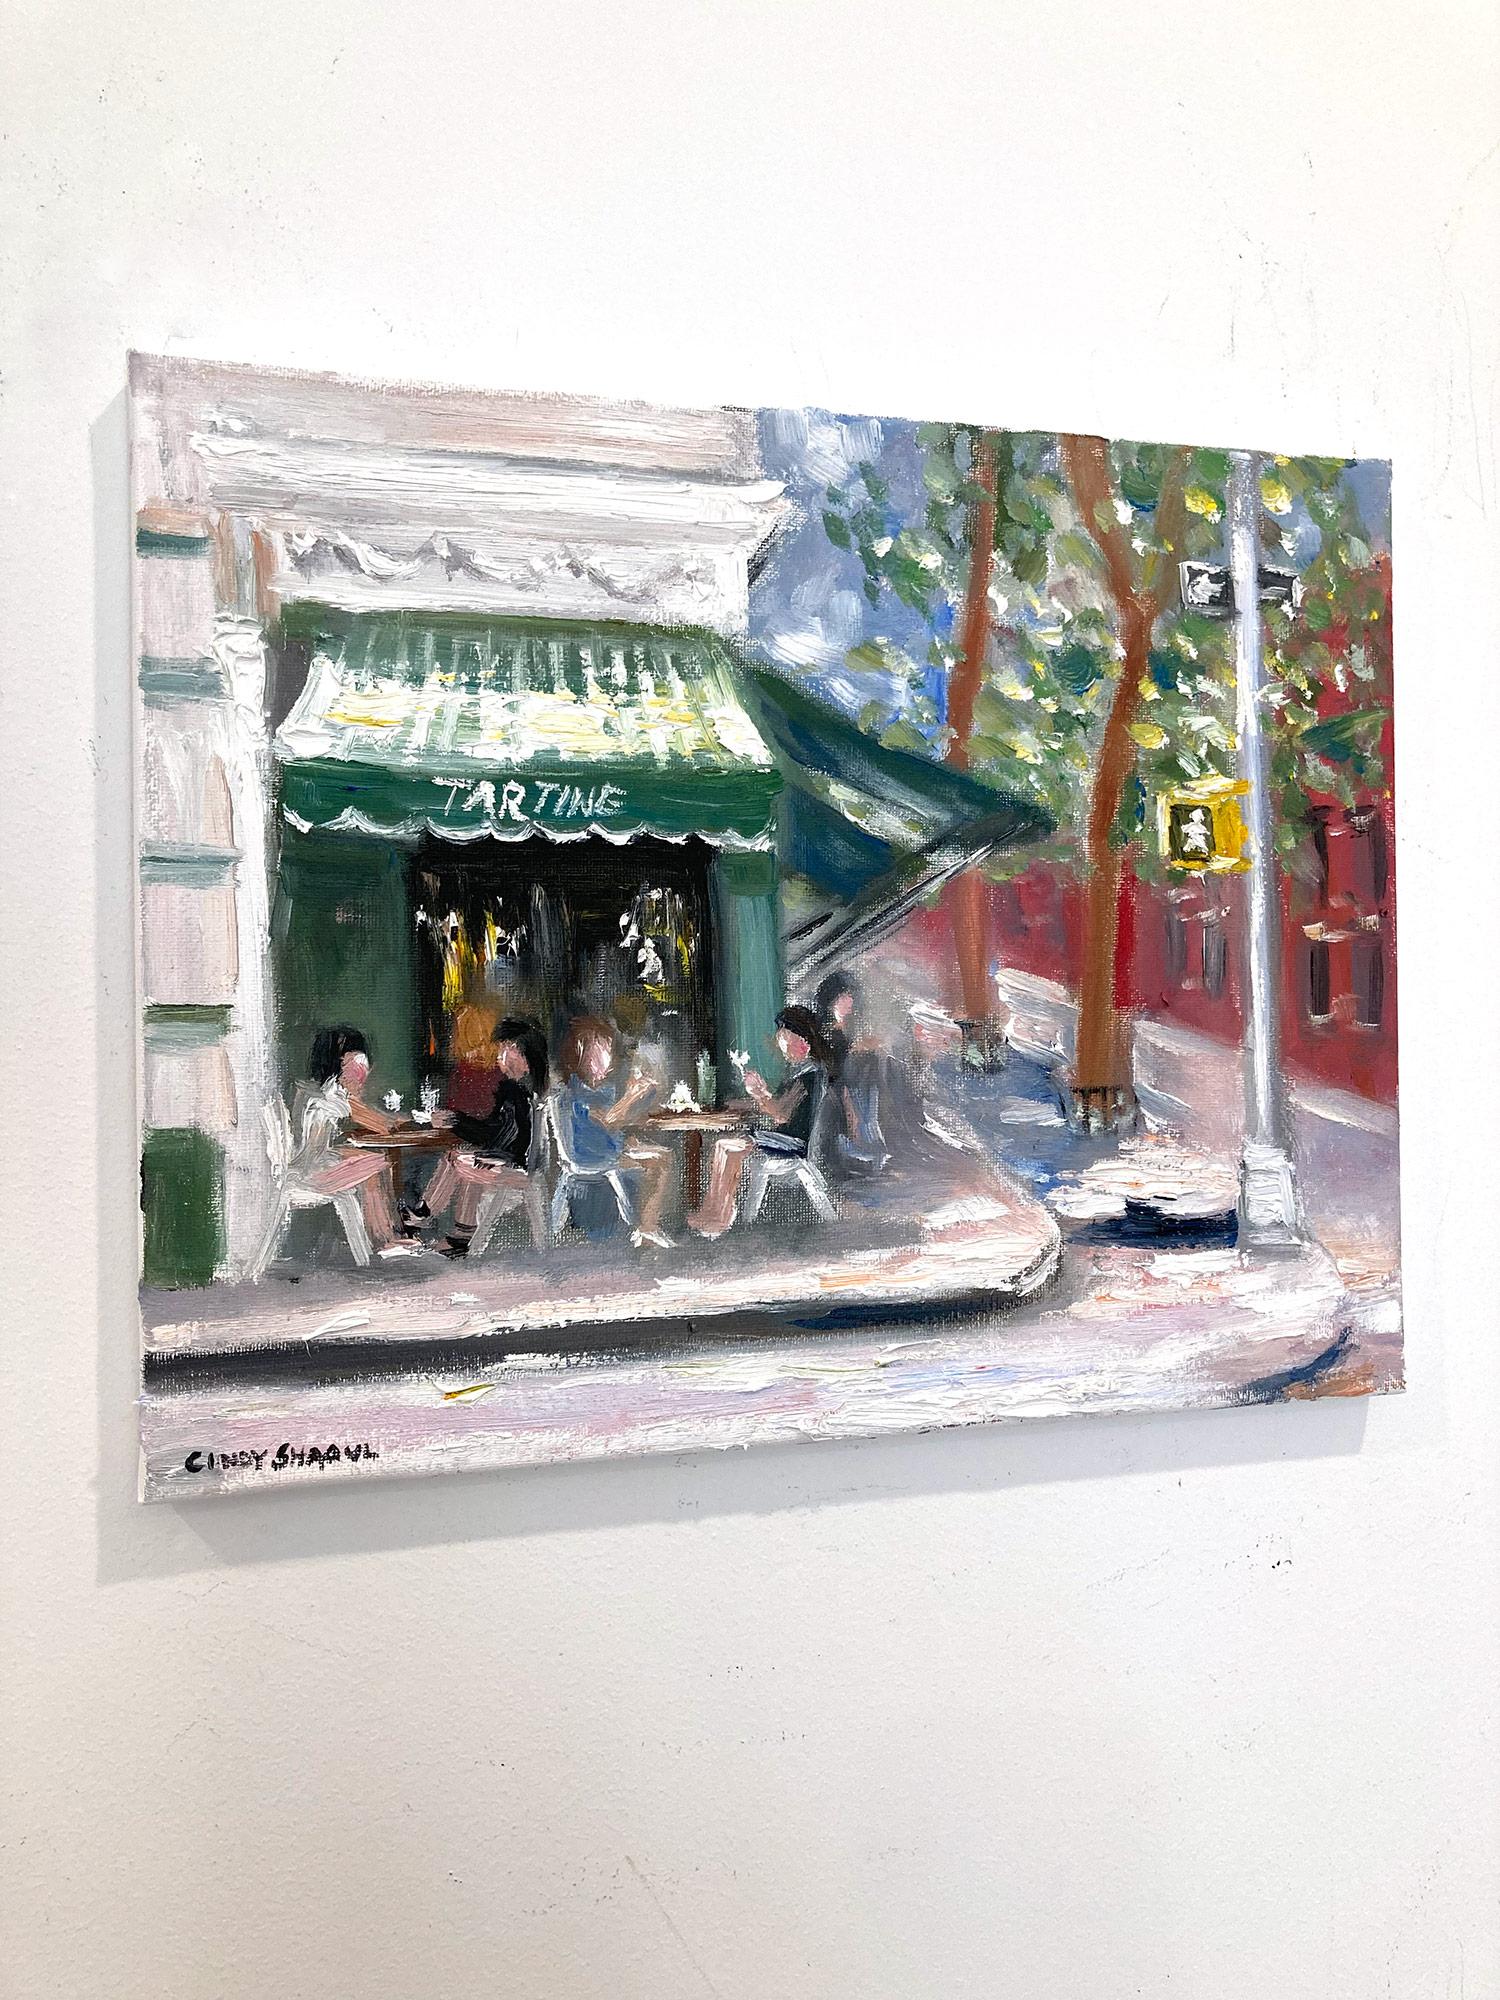 A charming depiction of Bruch at Tartine located in the West Village in Manhattan. A cozy impressionistic street scene with colors of vibrant red, lush greens, and yellow ochres. This painting was painted on sight by the artist. An iconic street